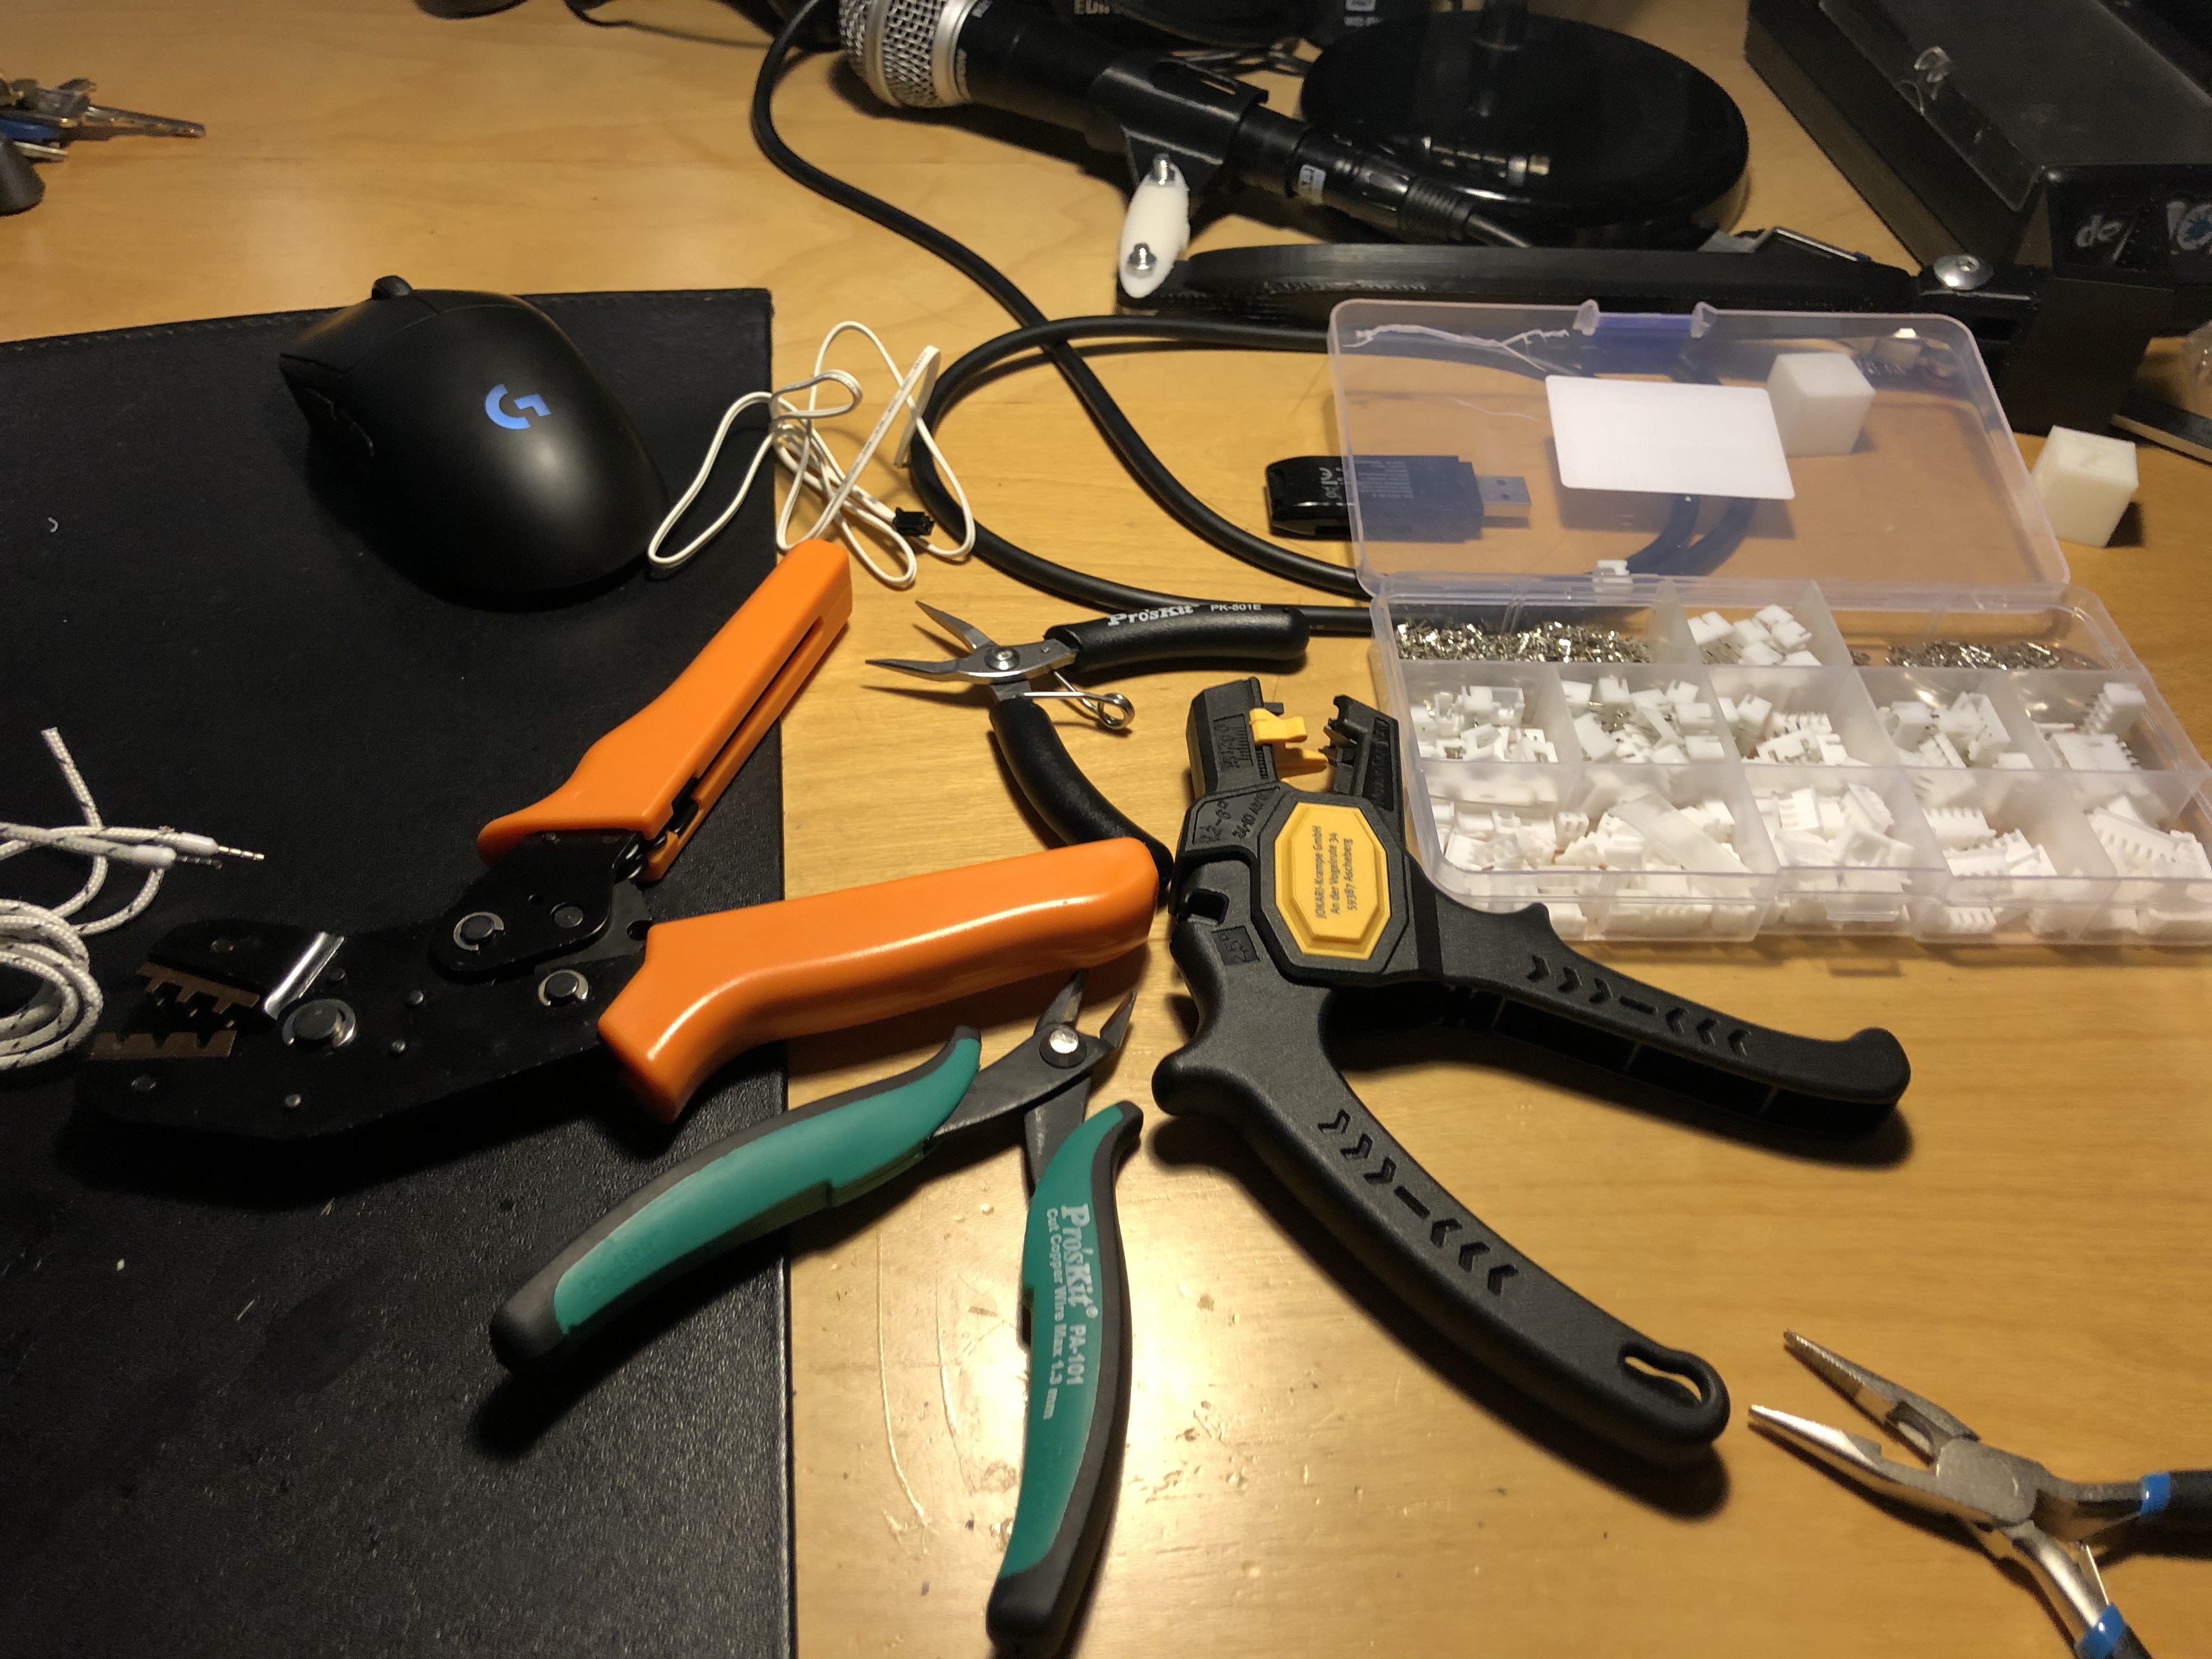 Crimping tools and wire strippers.